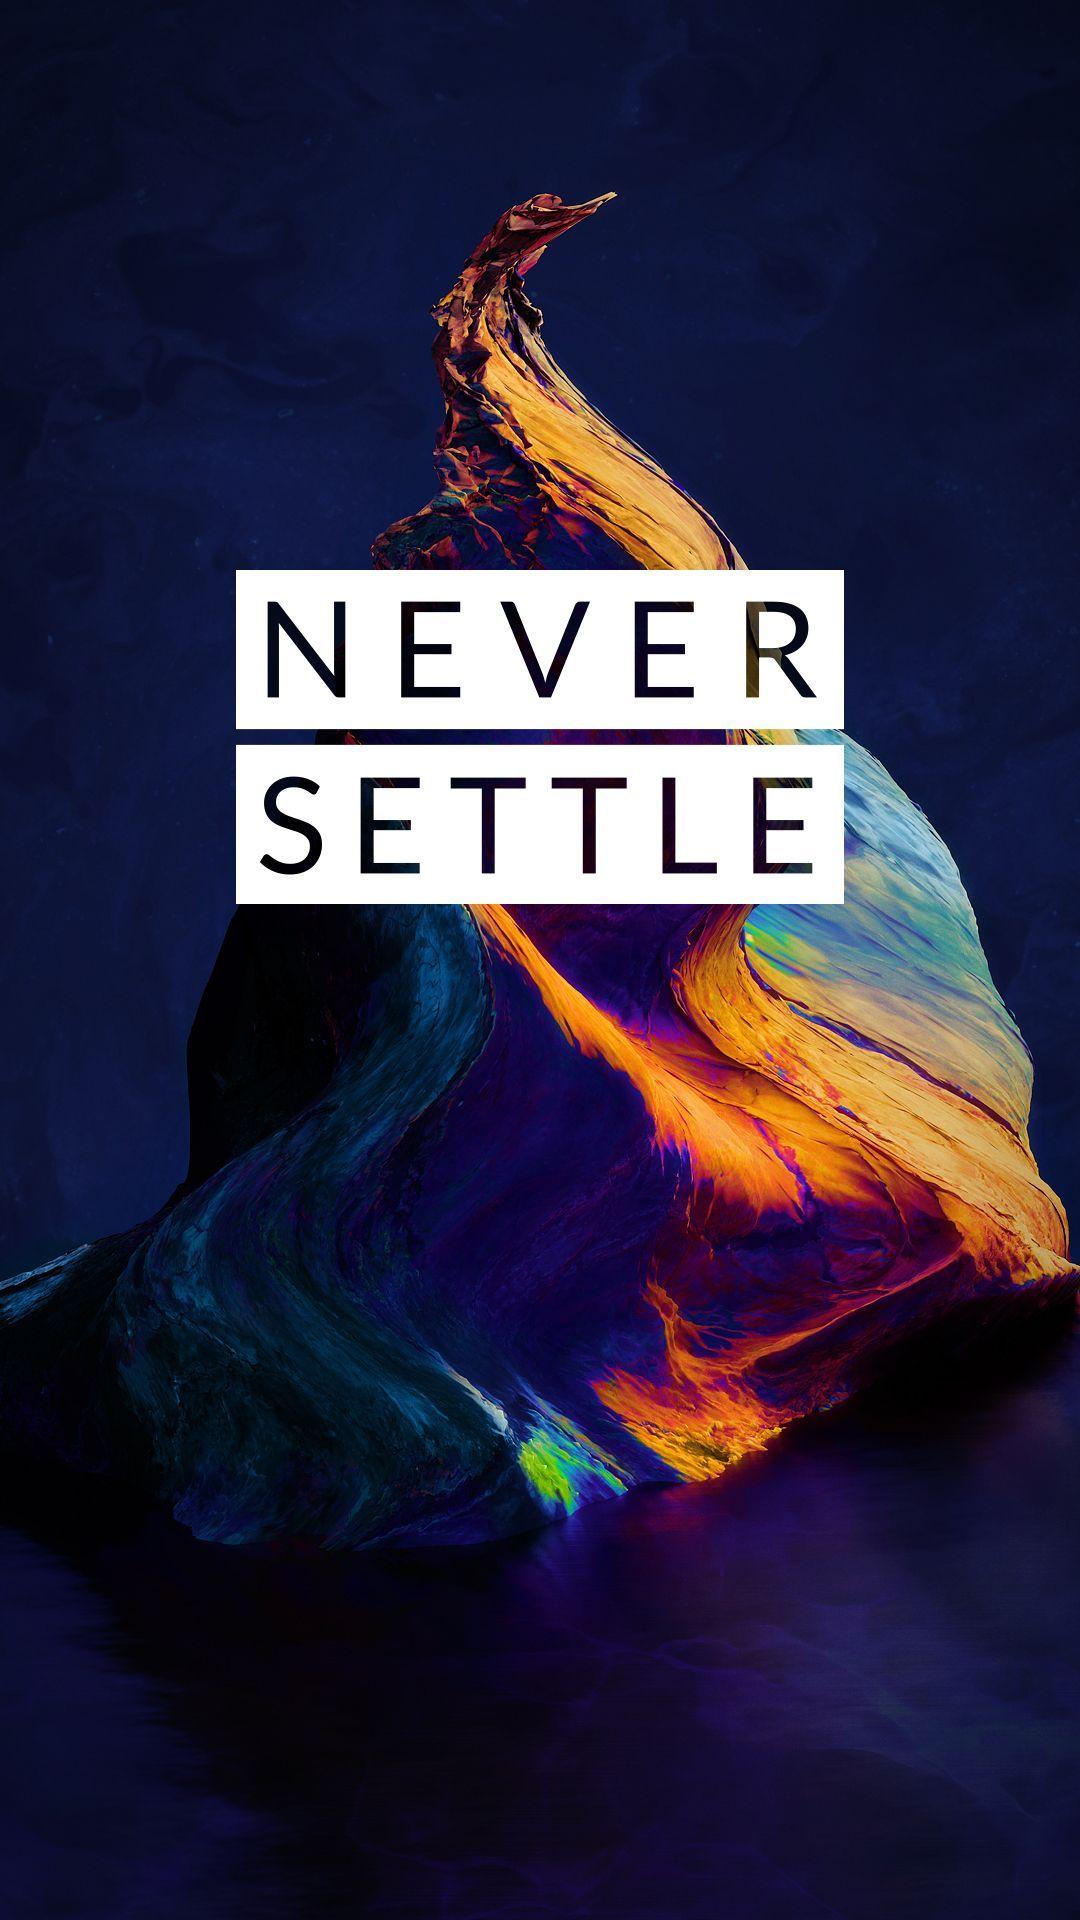 Install OnePlus Nord 2 Live Wallpapers on Any Android Without Root - YouTube